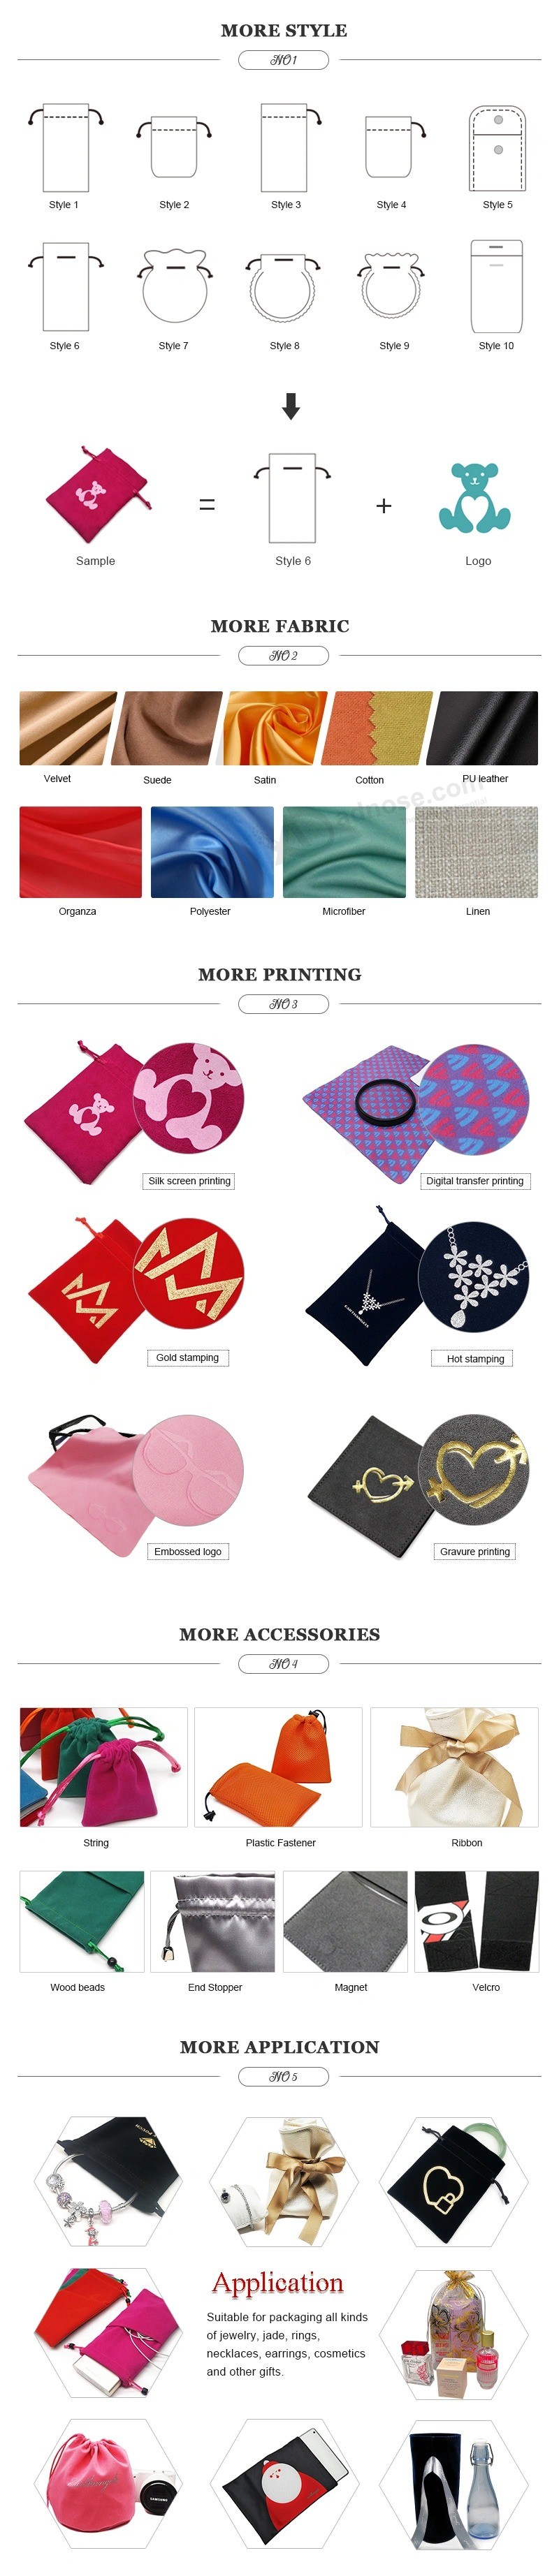 Hot Sell Cheap Custom Satin Jewelry Pouch Bags